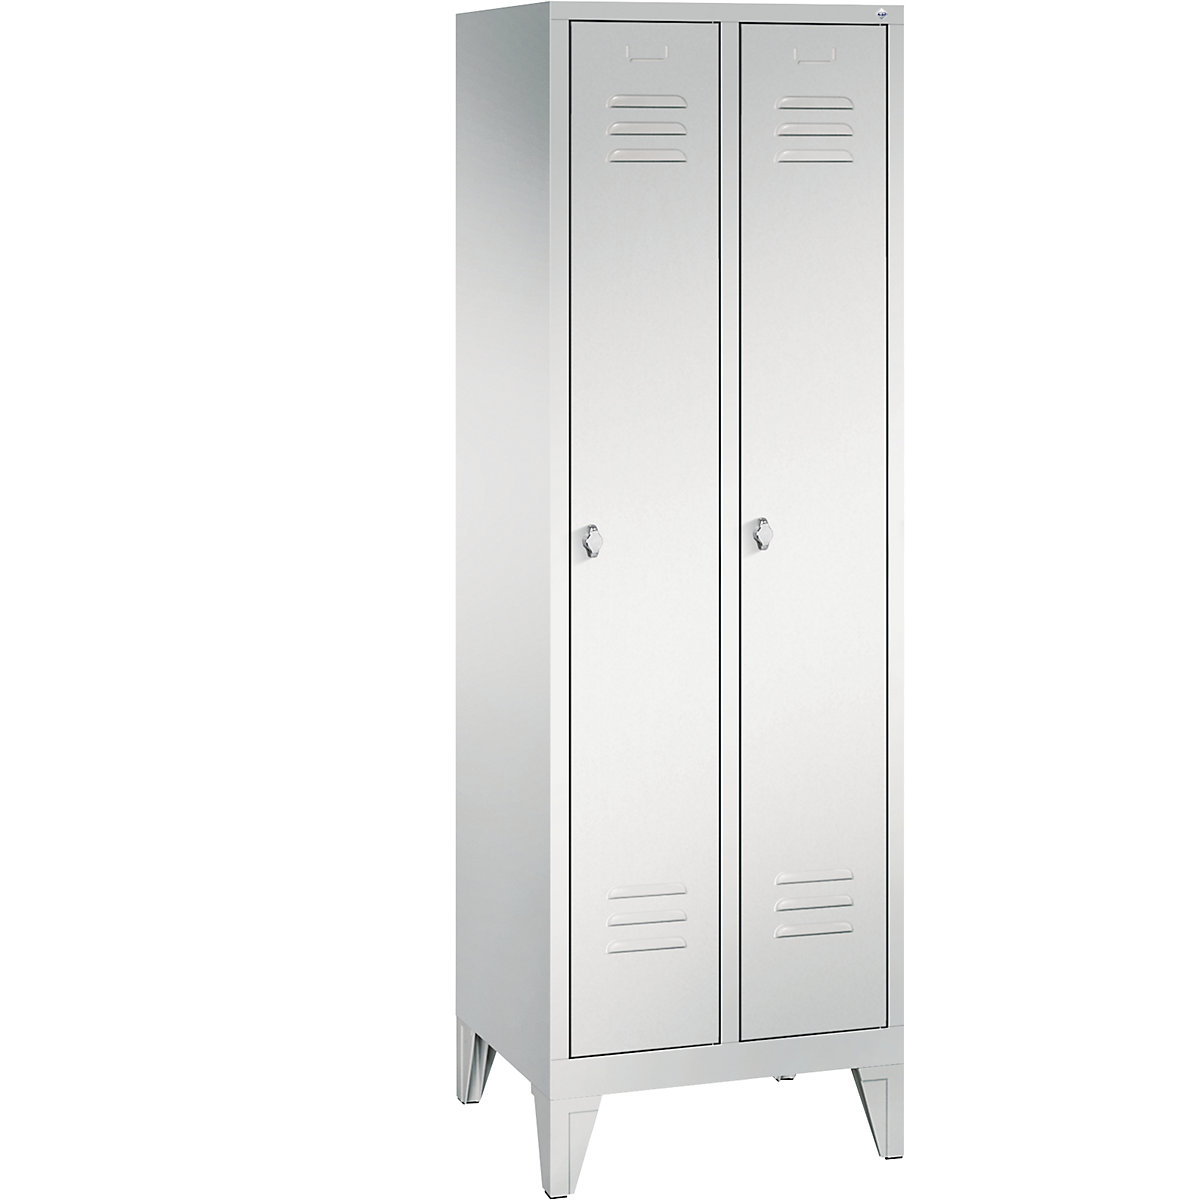 CLASSIC storage cupboard with feet – C+P, 2 compartments, compartment width 300 mm, light grey-5